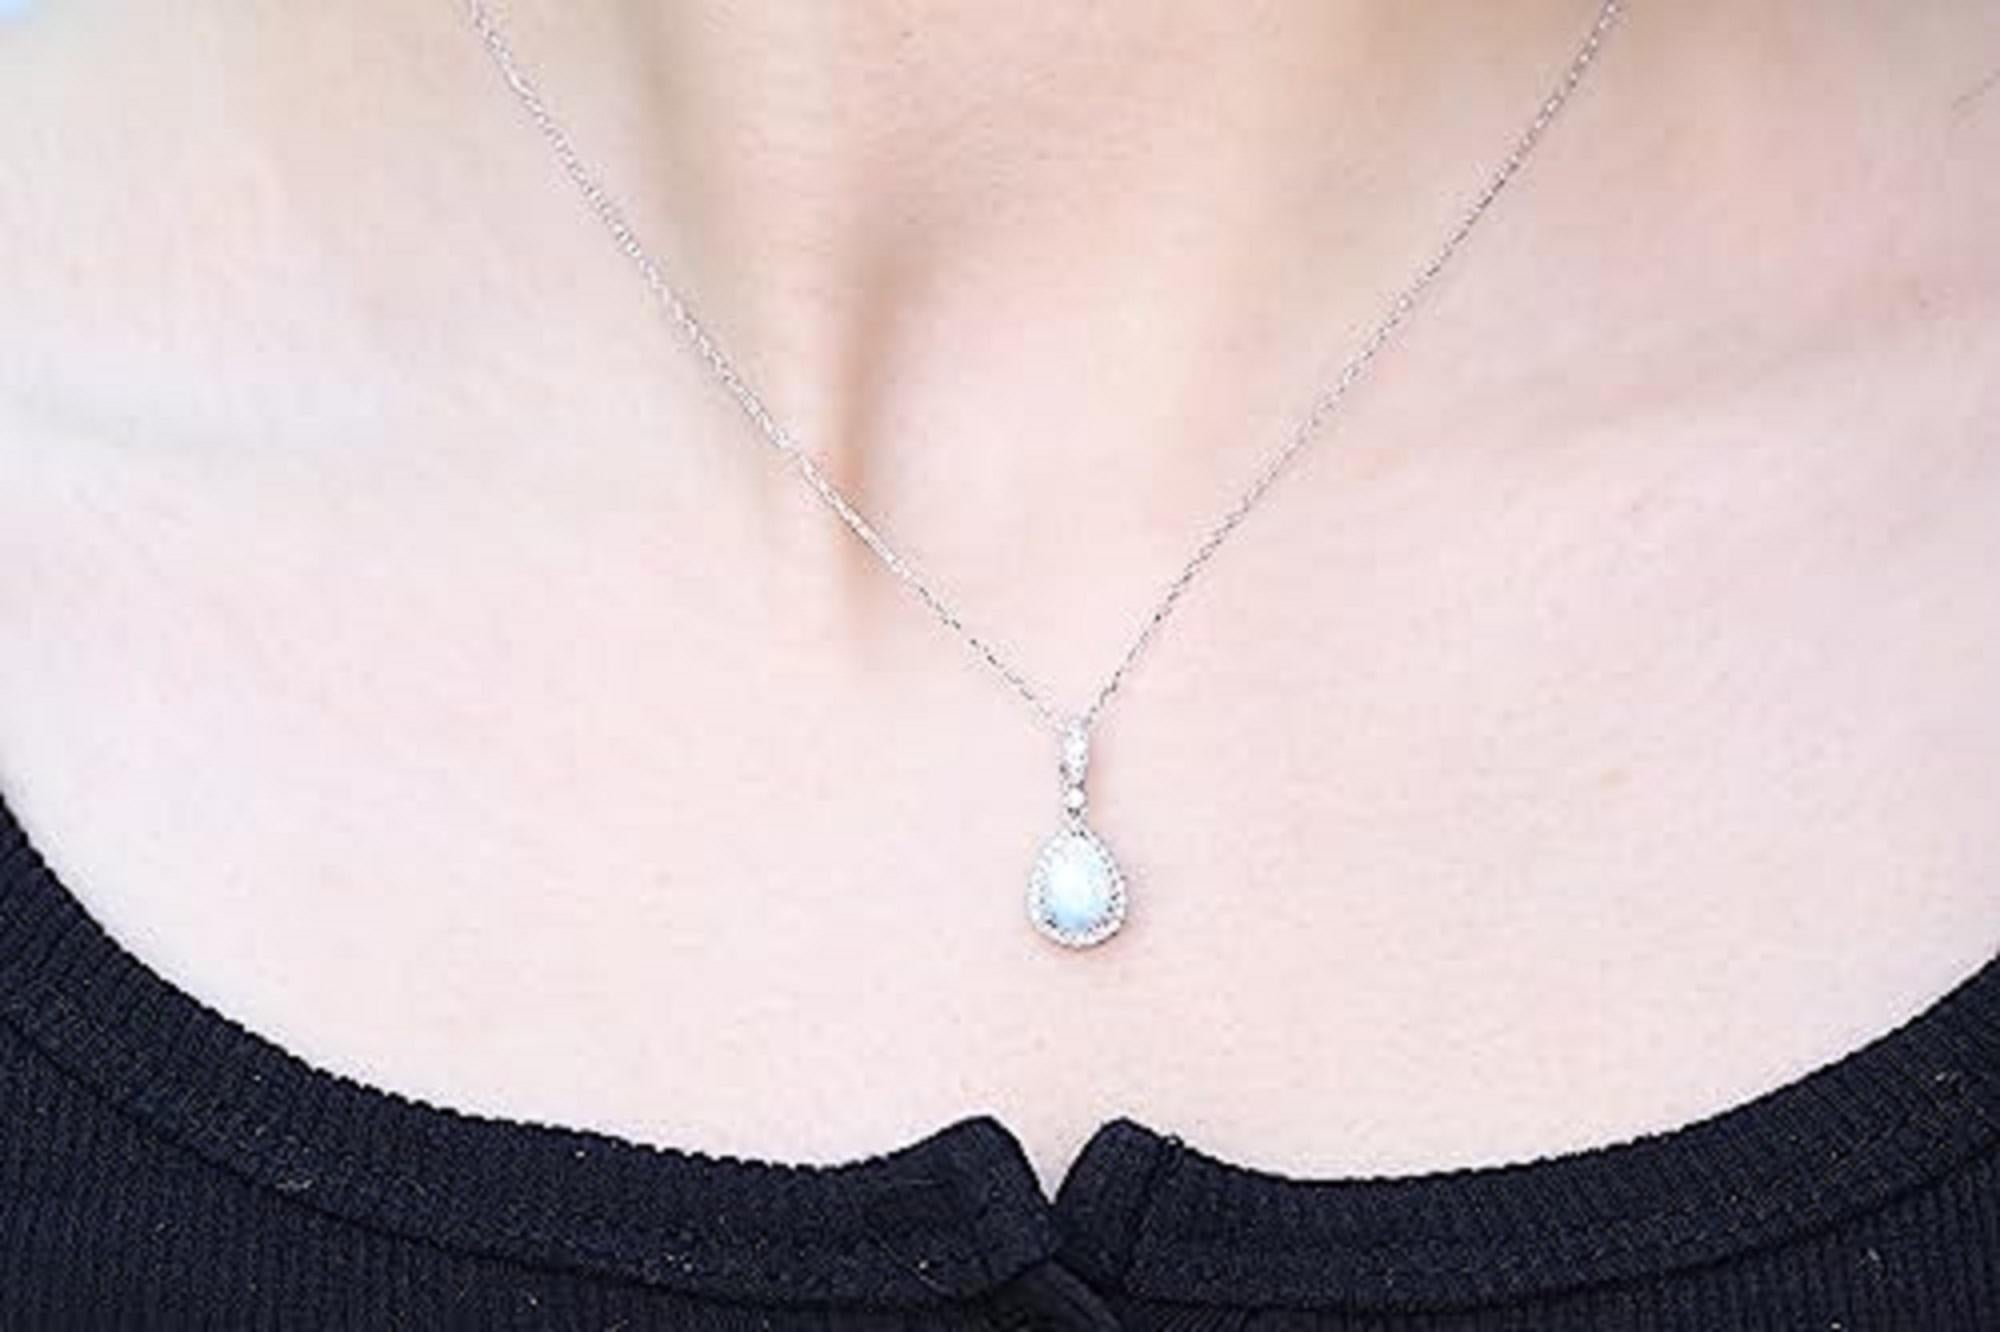 Decorate yourself in elegance with this Pendant is crafted from 14-karat White Gold by Gin & Grace Pendant. This Pendant is made up of 6*8 Pear-cut Prong setting Ethiopian opal (1 Pcs) 1.81 Carat and Round-Cut Prong setting White Diamond (28 Pcs)